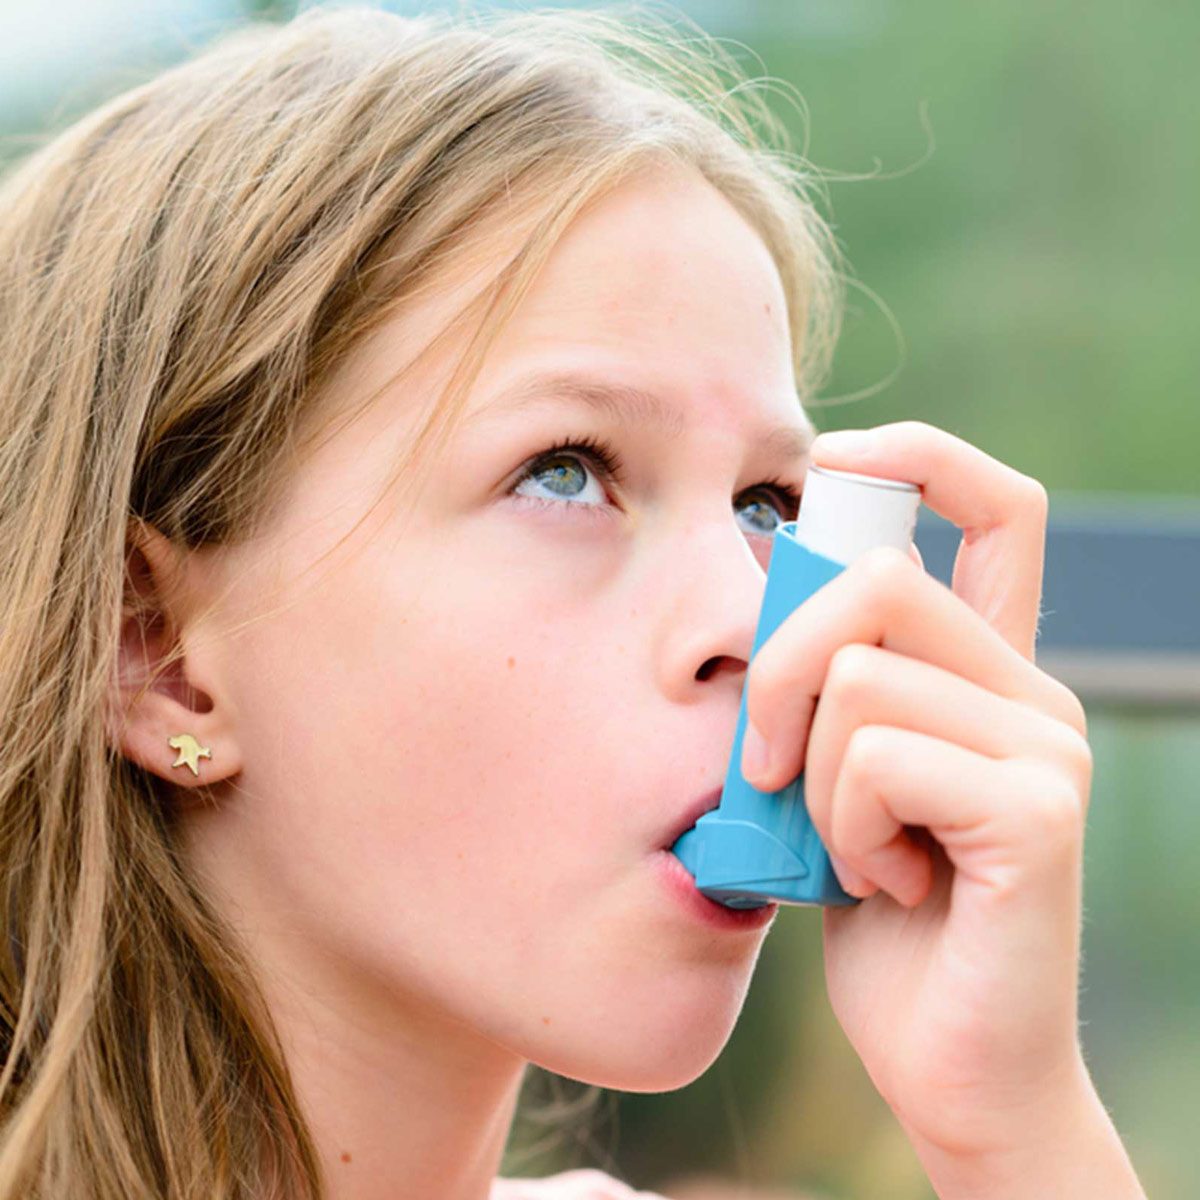 Prevent an Asthma Attack